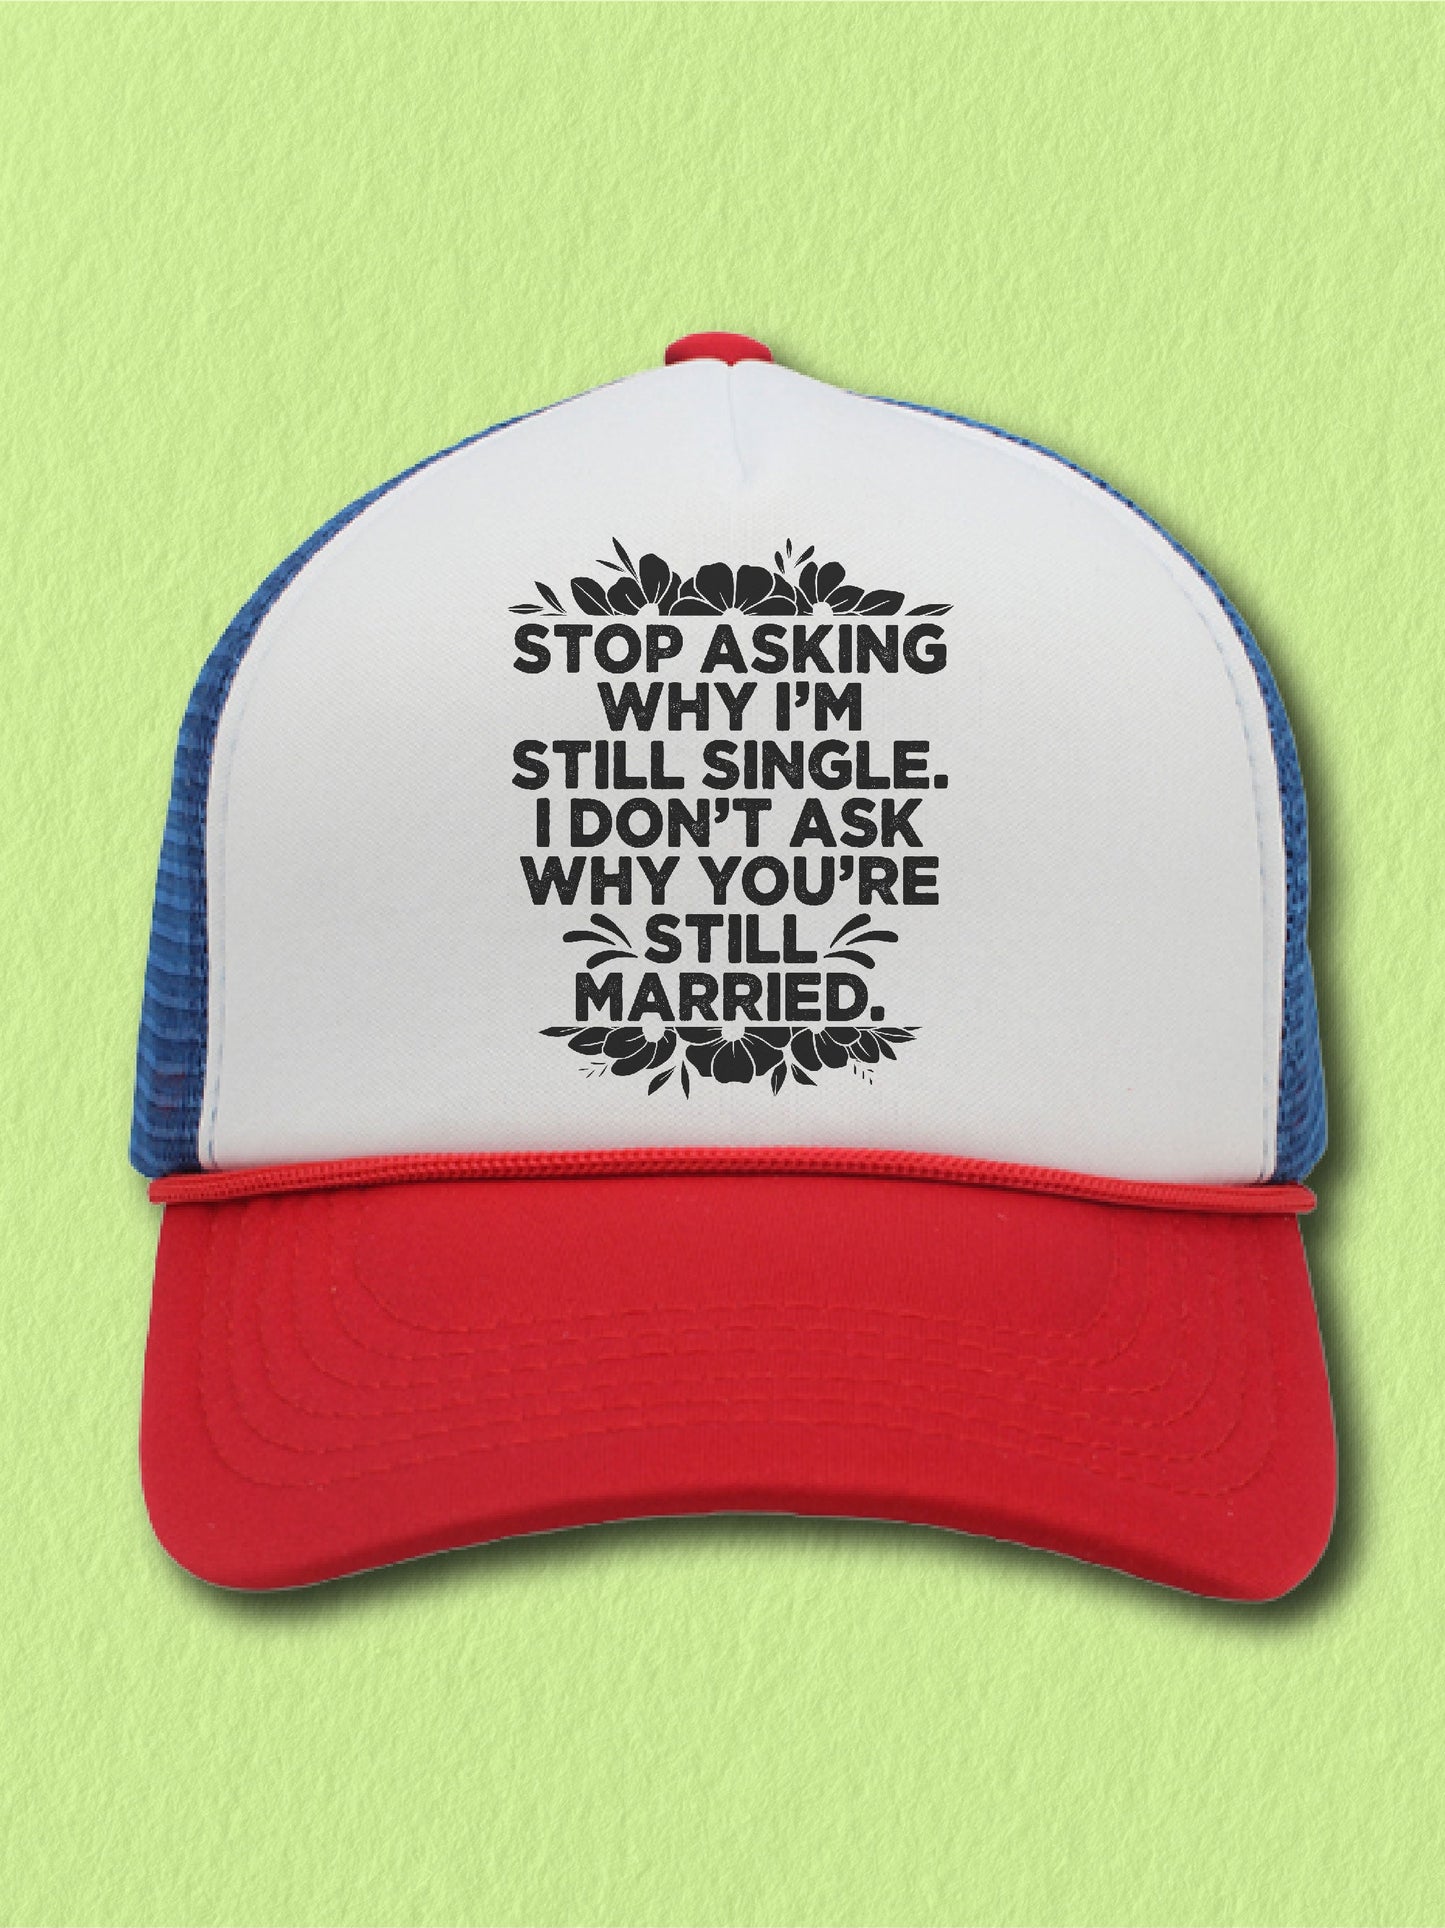 Stop Asking Why I'm Still Single. I Don't Ask Why You're Still Married. - (Hat)